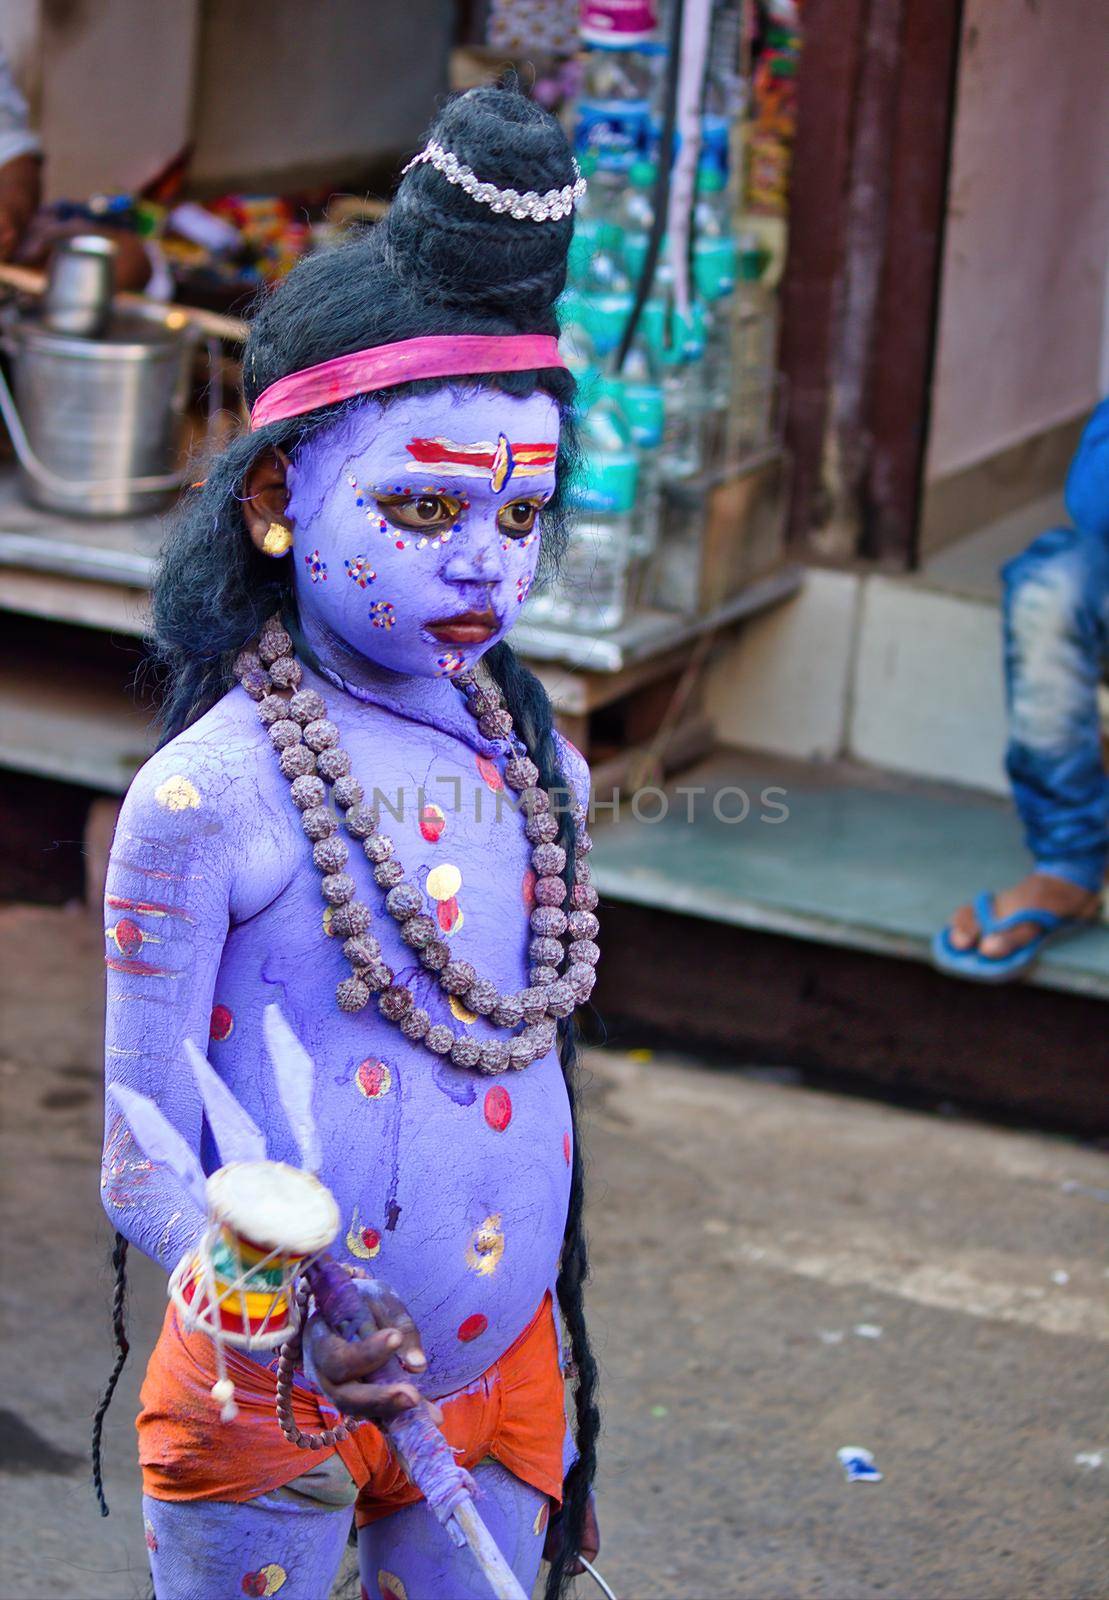 Pushkar, India - NOVEMBER 10, 2016: An unidentified boy dressed and disguised as hindu Lord Shiva with blue paint attends the Pushkar cattle fair in the state of Rajasthan